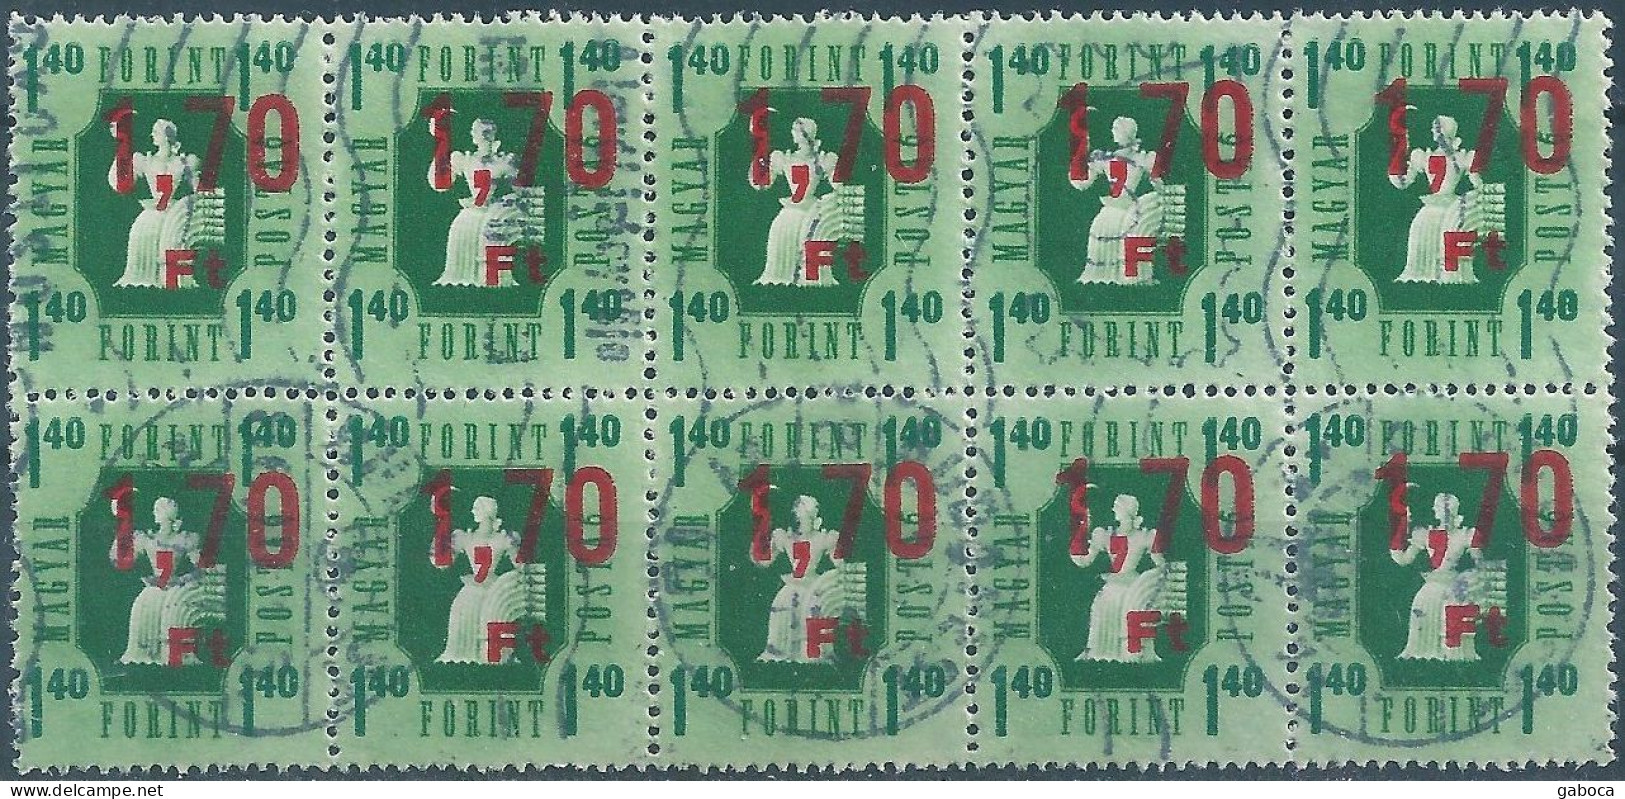 C5899 Hungary Parcel Stamp Agriculture Harvest Ovprnt Plate Block Of 10 Used 2xERROR - Posta